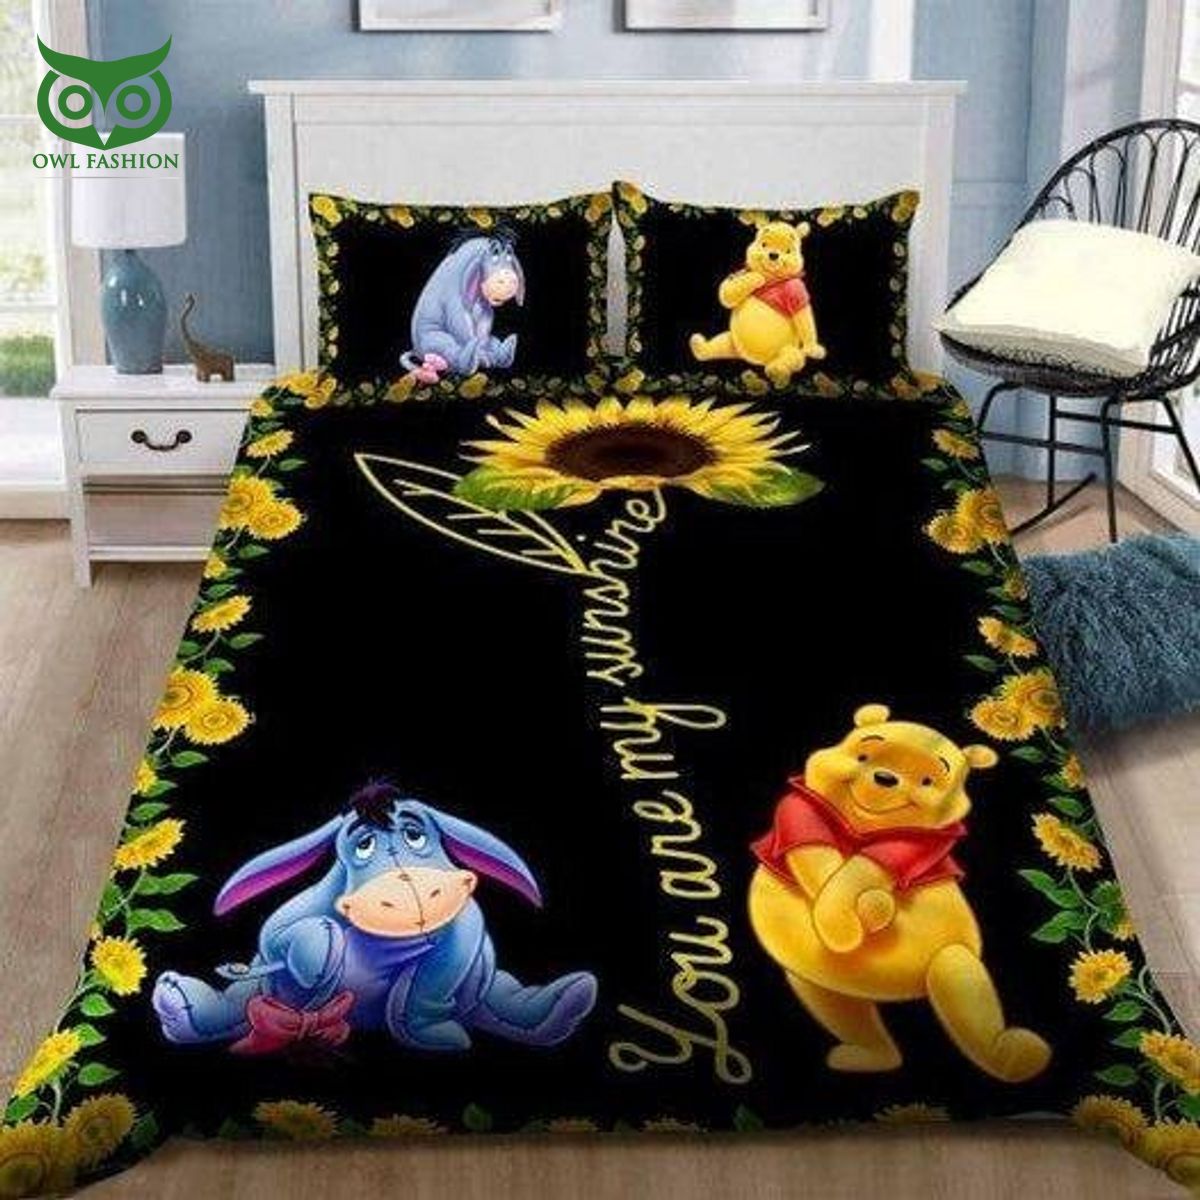 Winnie The Pooh Blood And Honey Bedding Set You look lazy